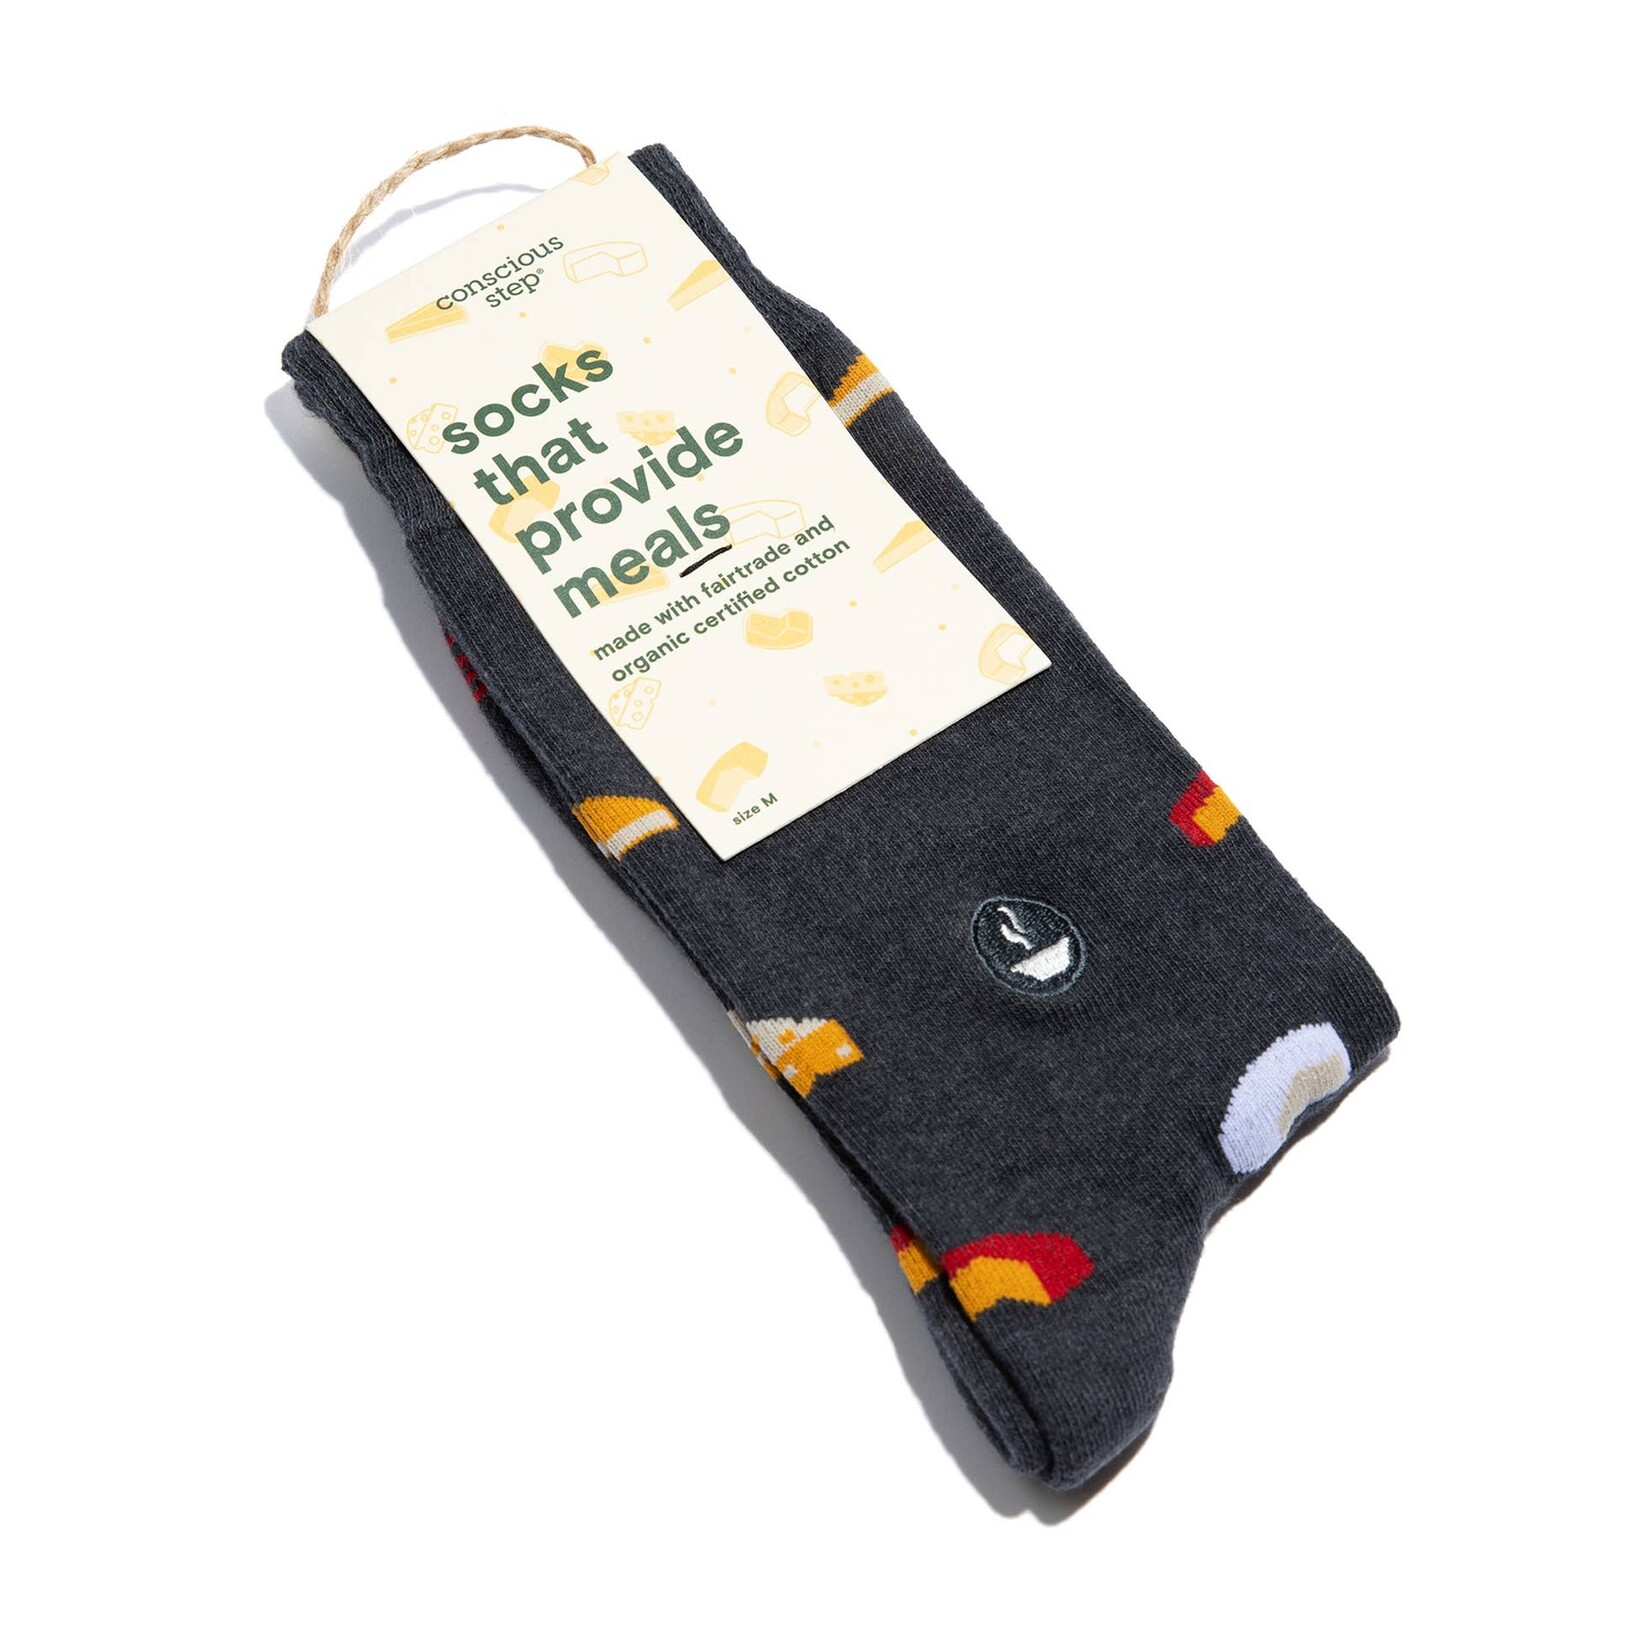 Conscious Step Socks that Provide Meals (Gray Cheese) MD